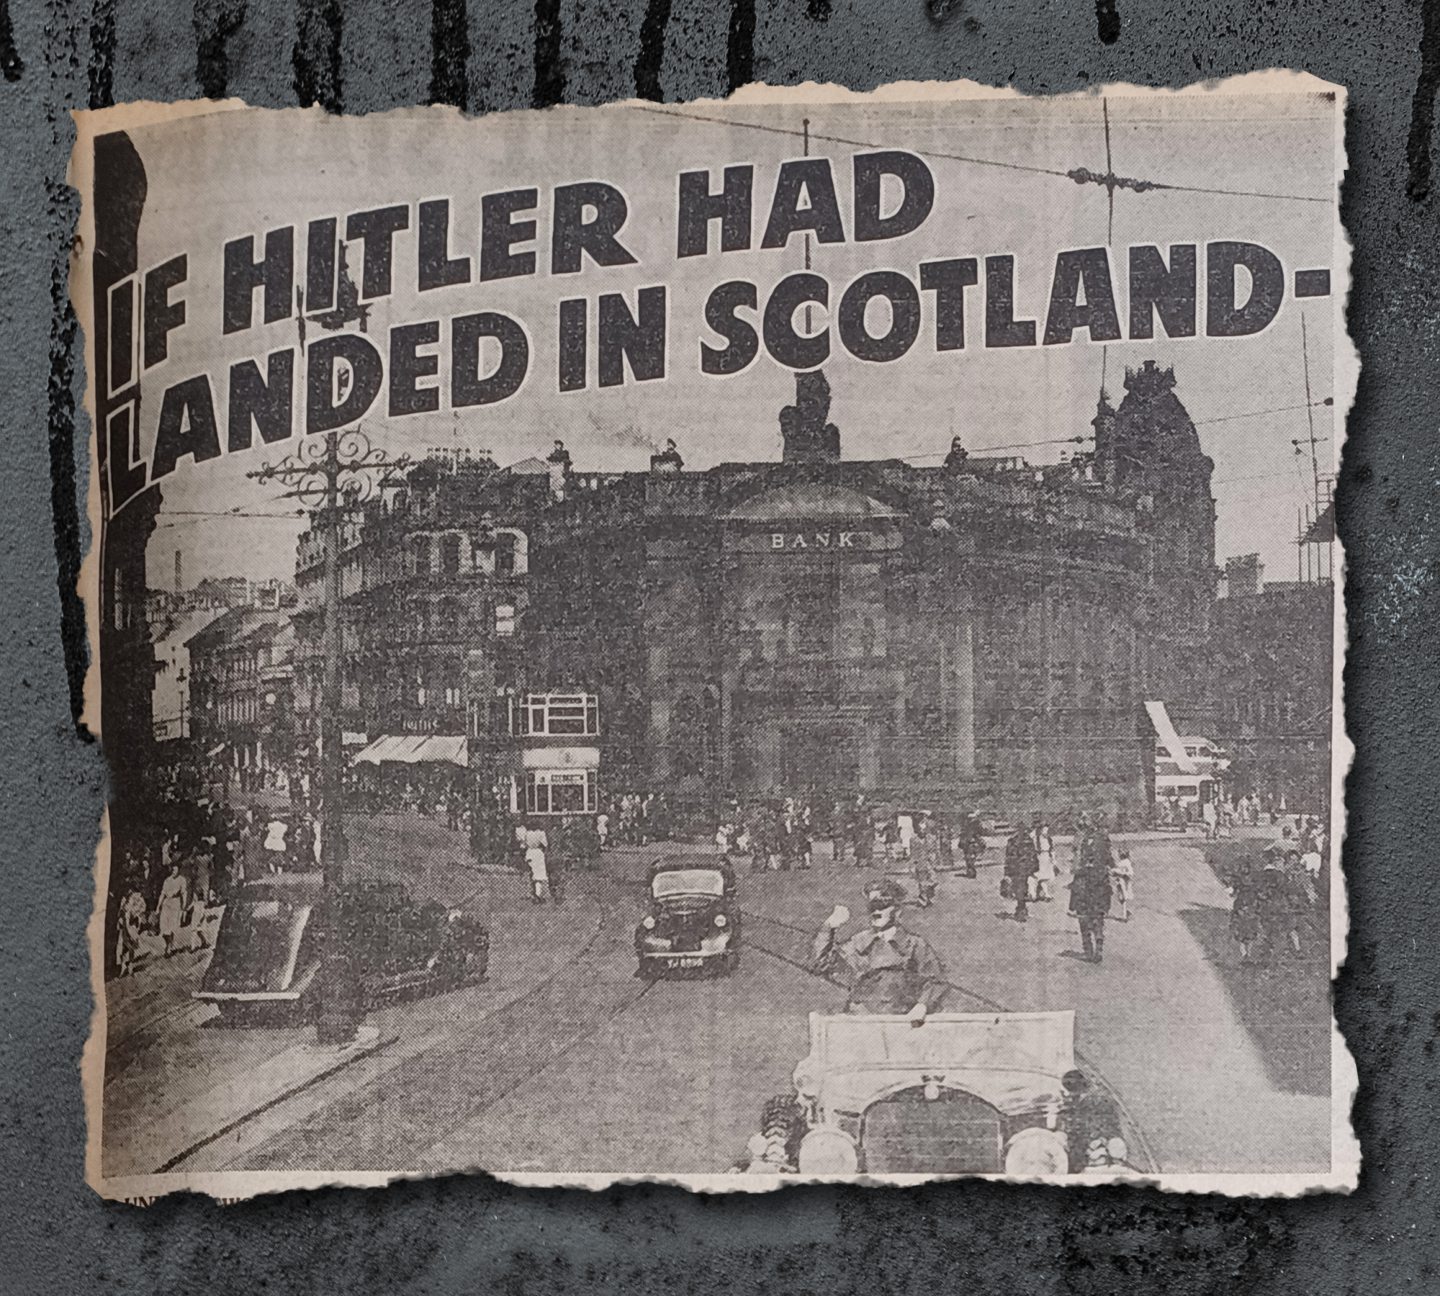 Papers across Scotland were preparing for Hitler's invasion. 